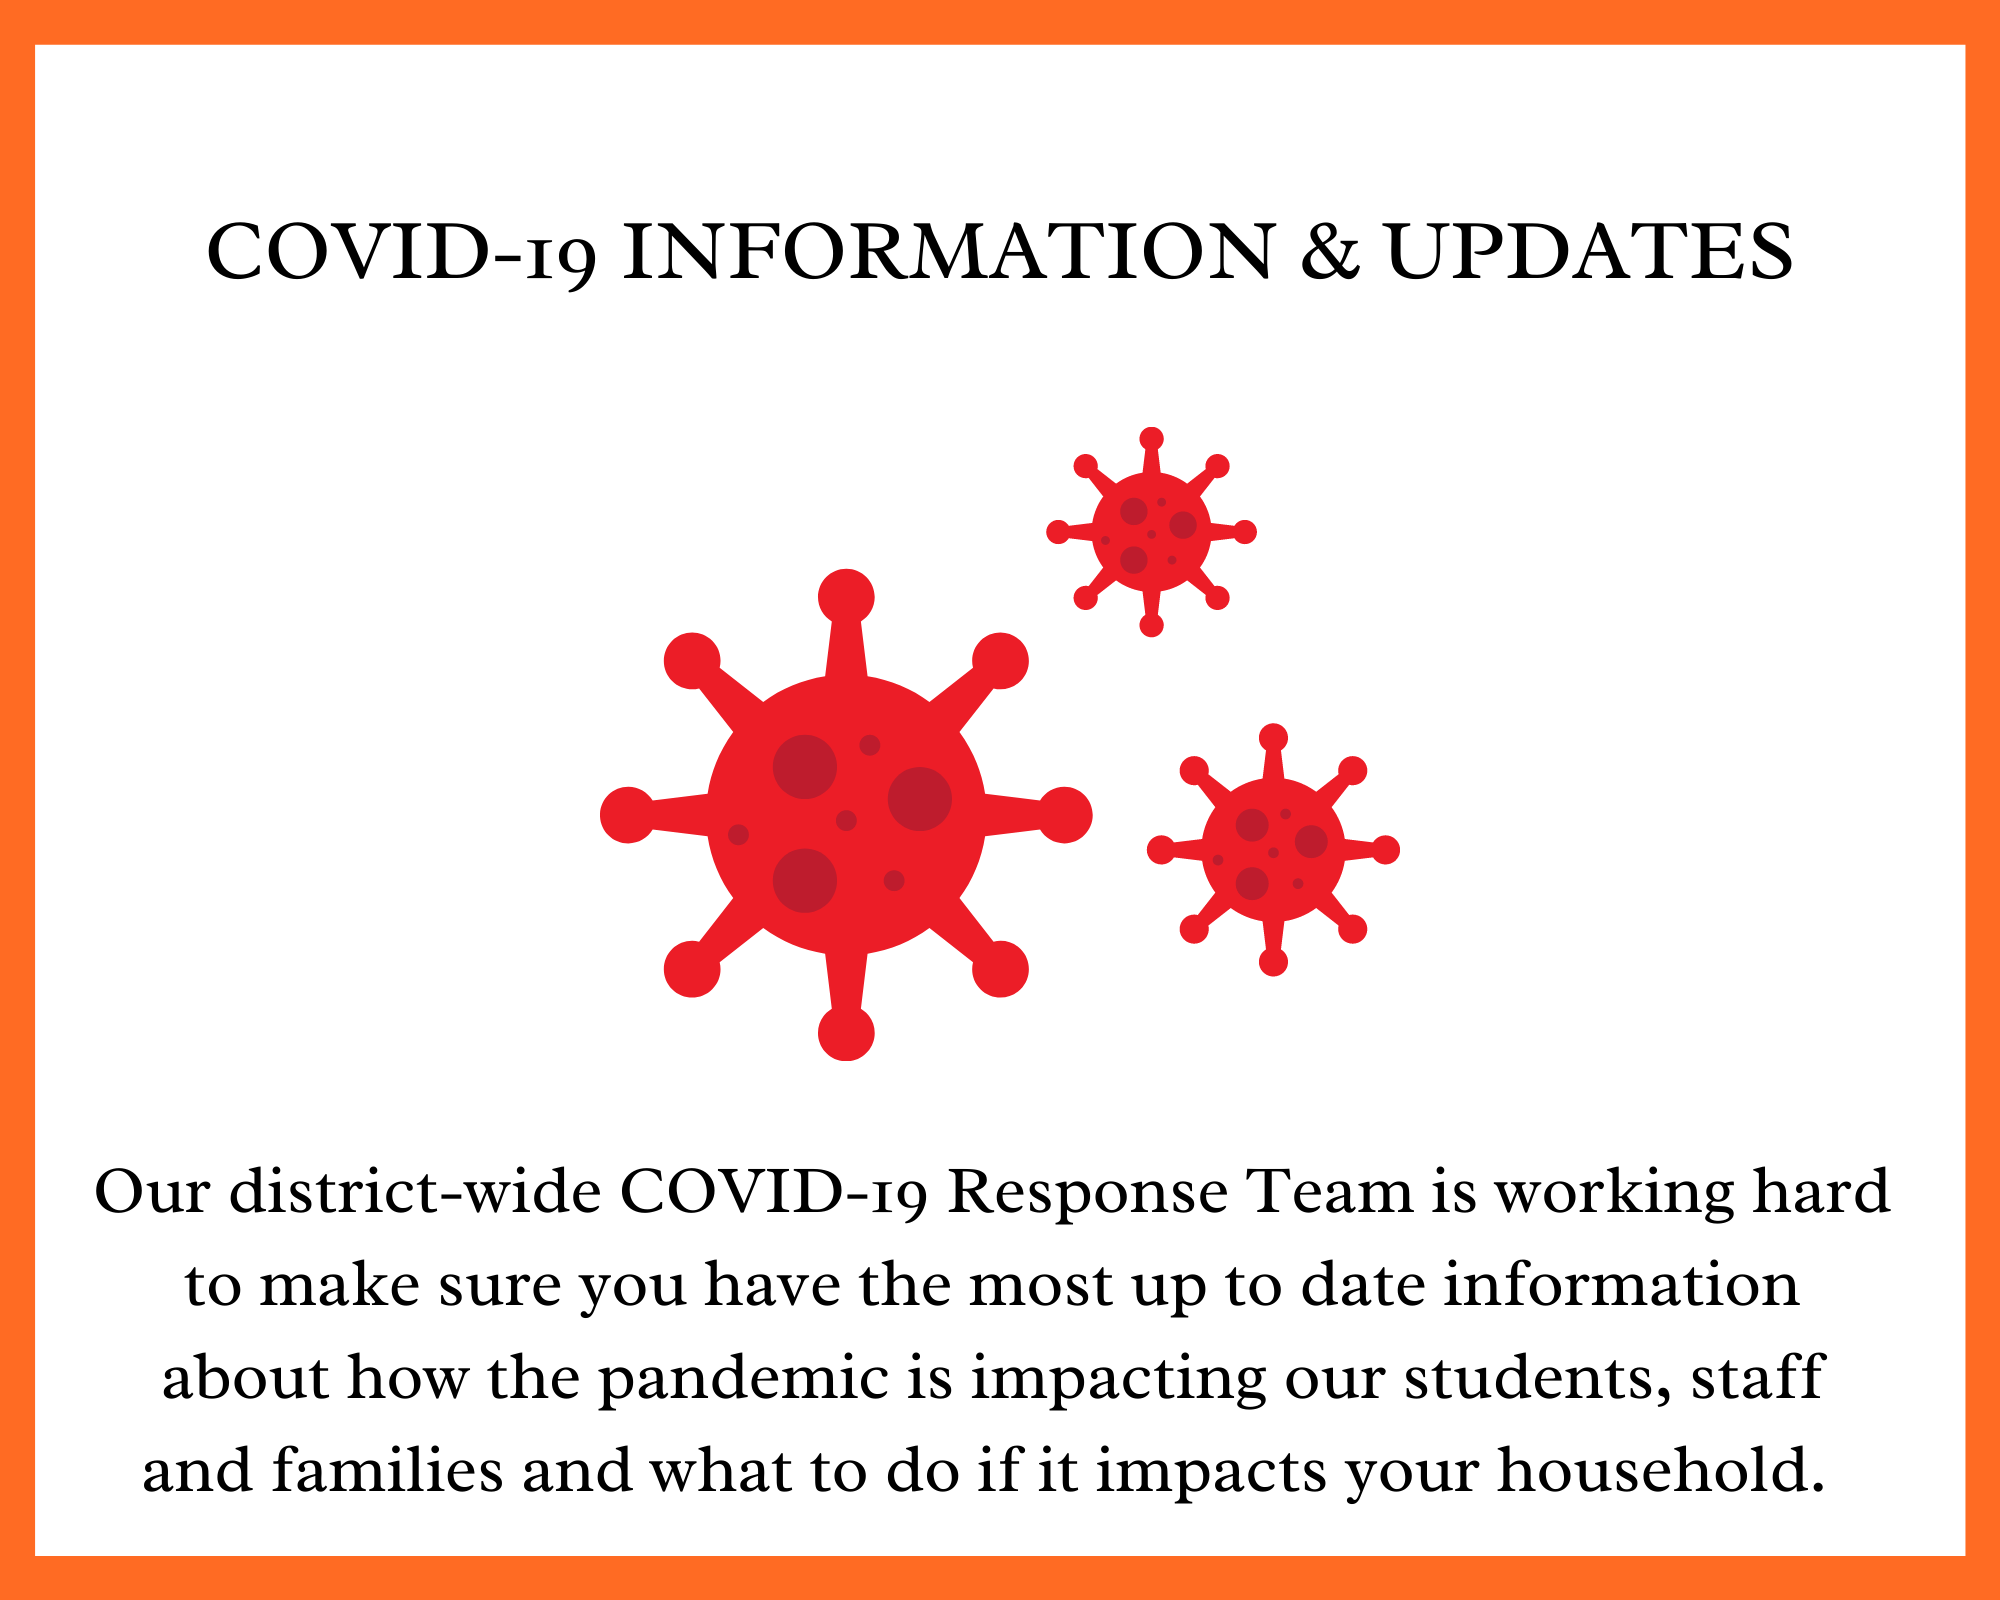 COVID-19 Information and Updates